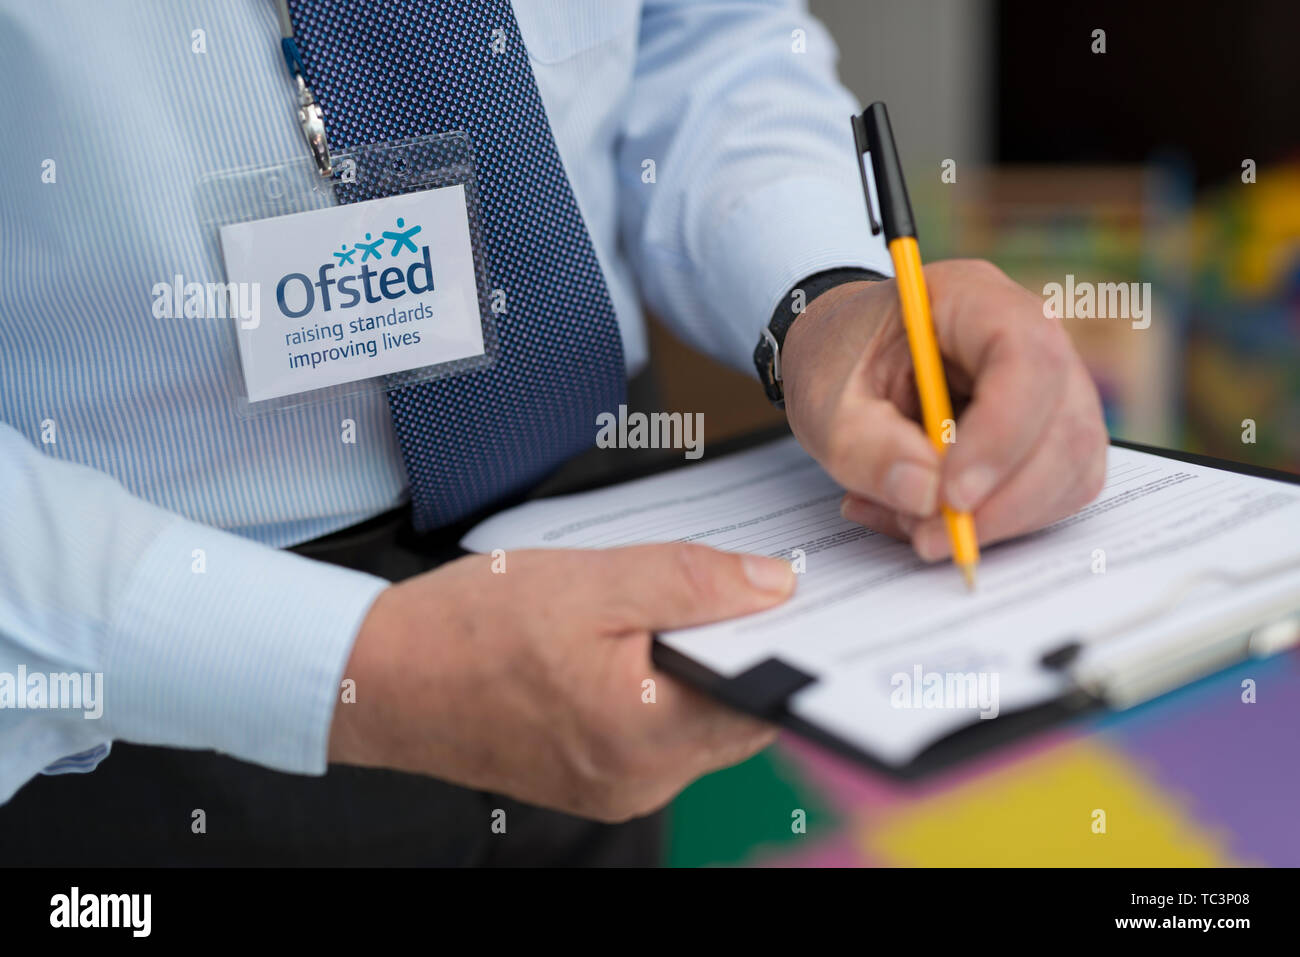 A man dressed in a shirt and tie with an Ofsted lanyard appears to be compiling a report using a pen and clipboard. (Editorial use only) Stock Photo